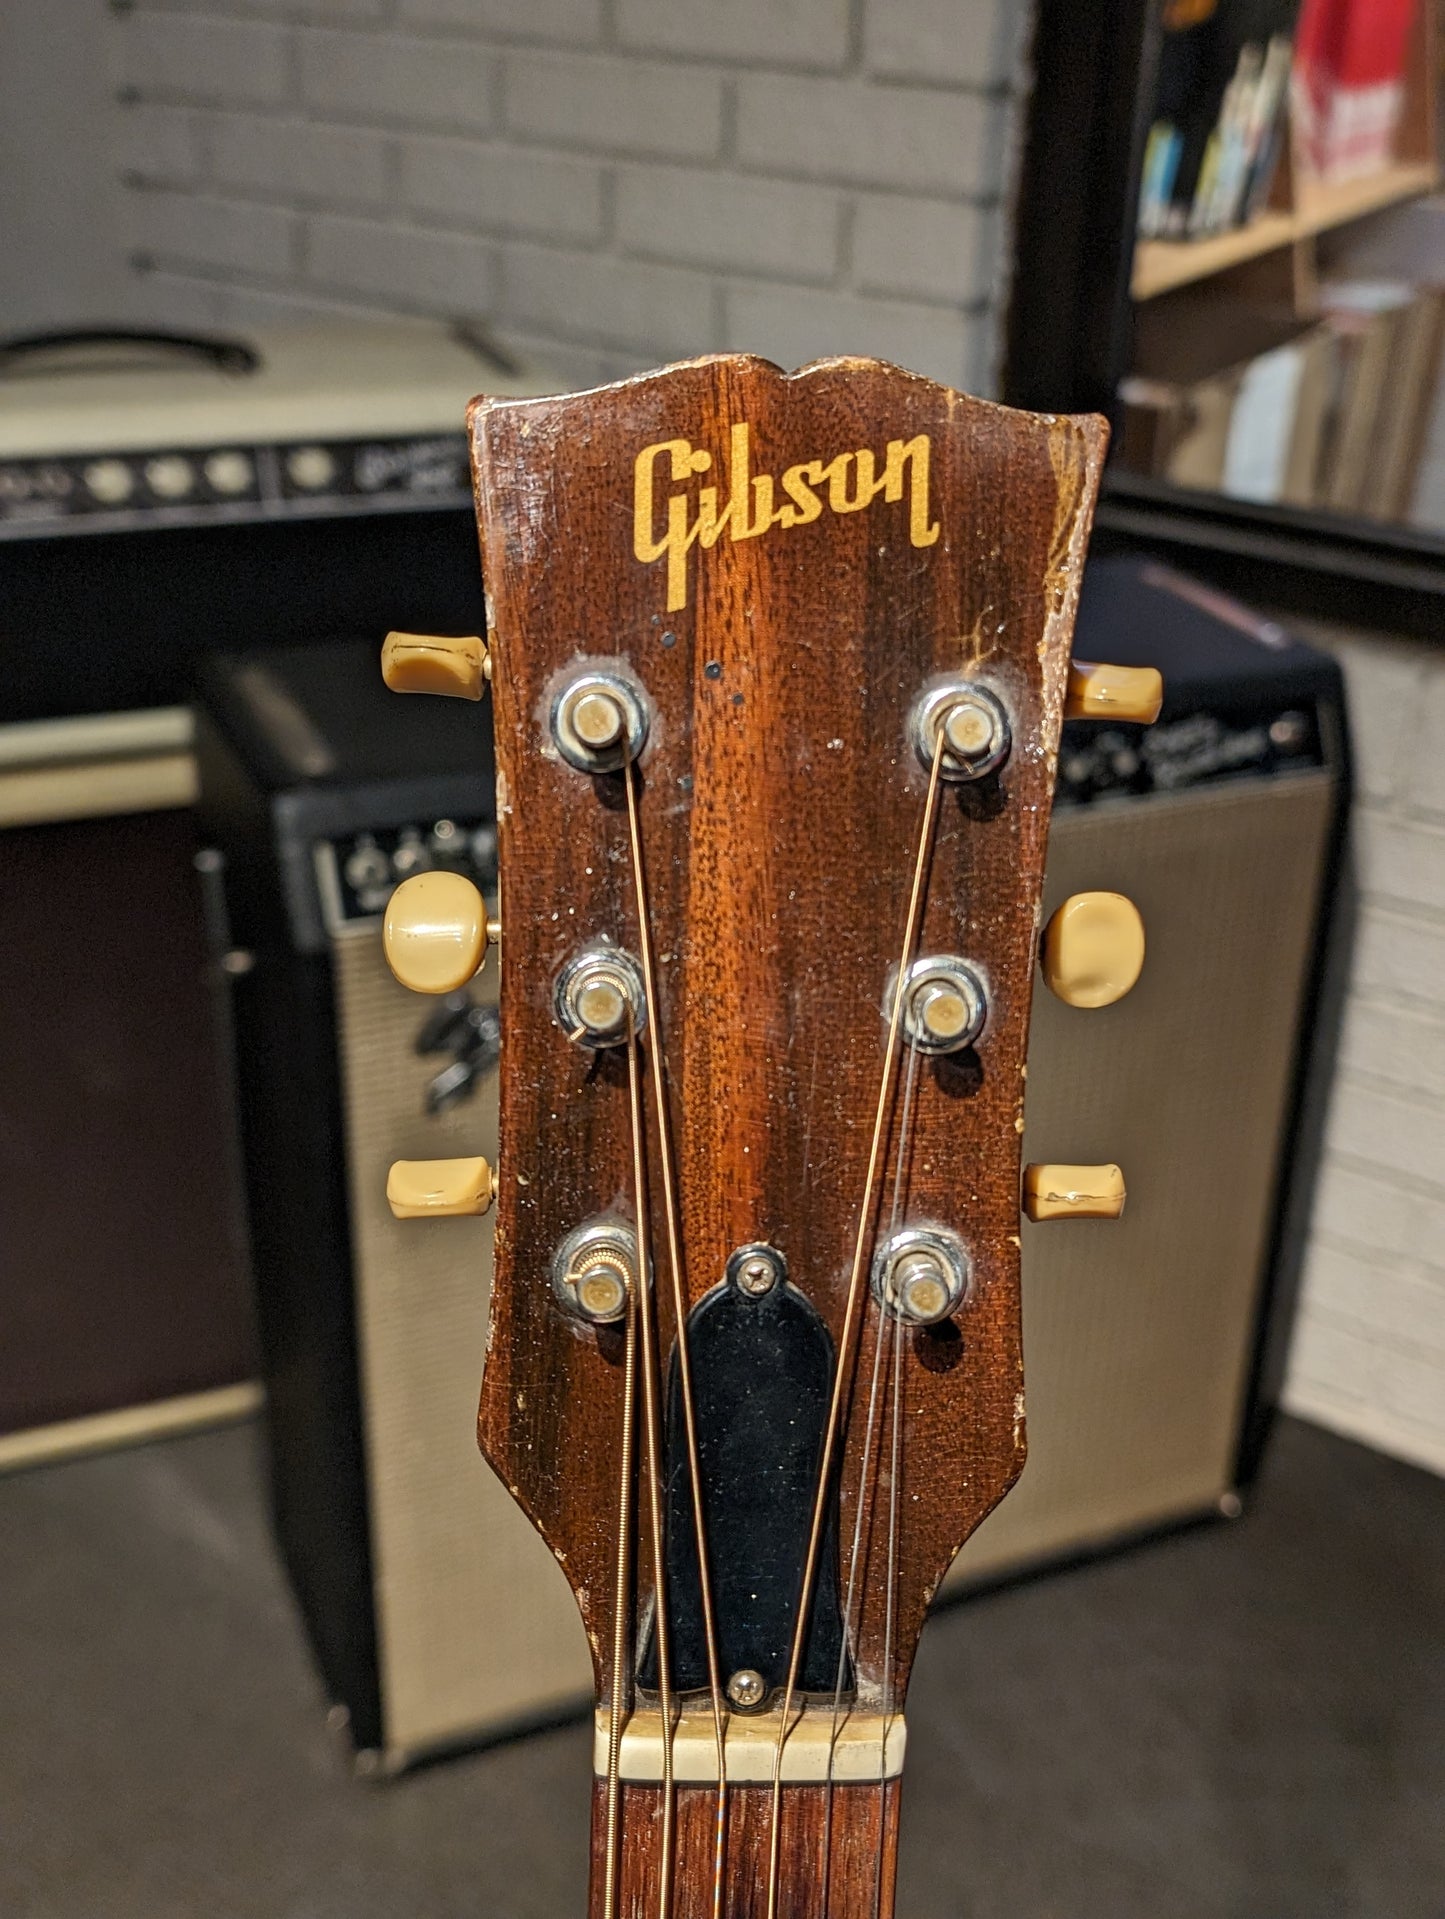 Gibson LG-1 Acoustic Guitar w/Case (1967)